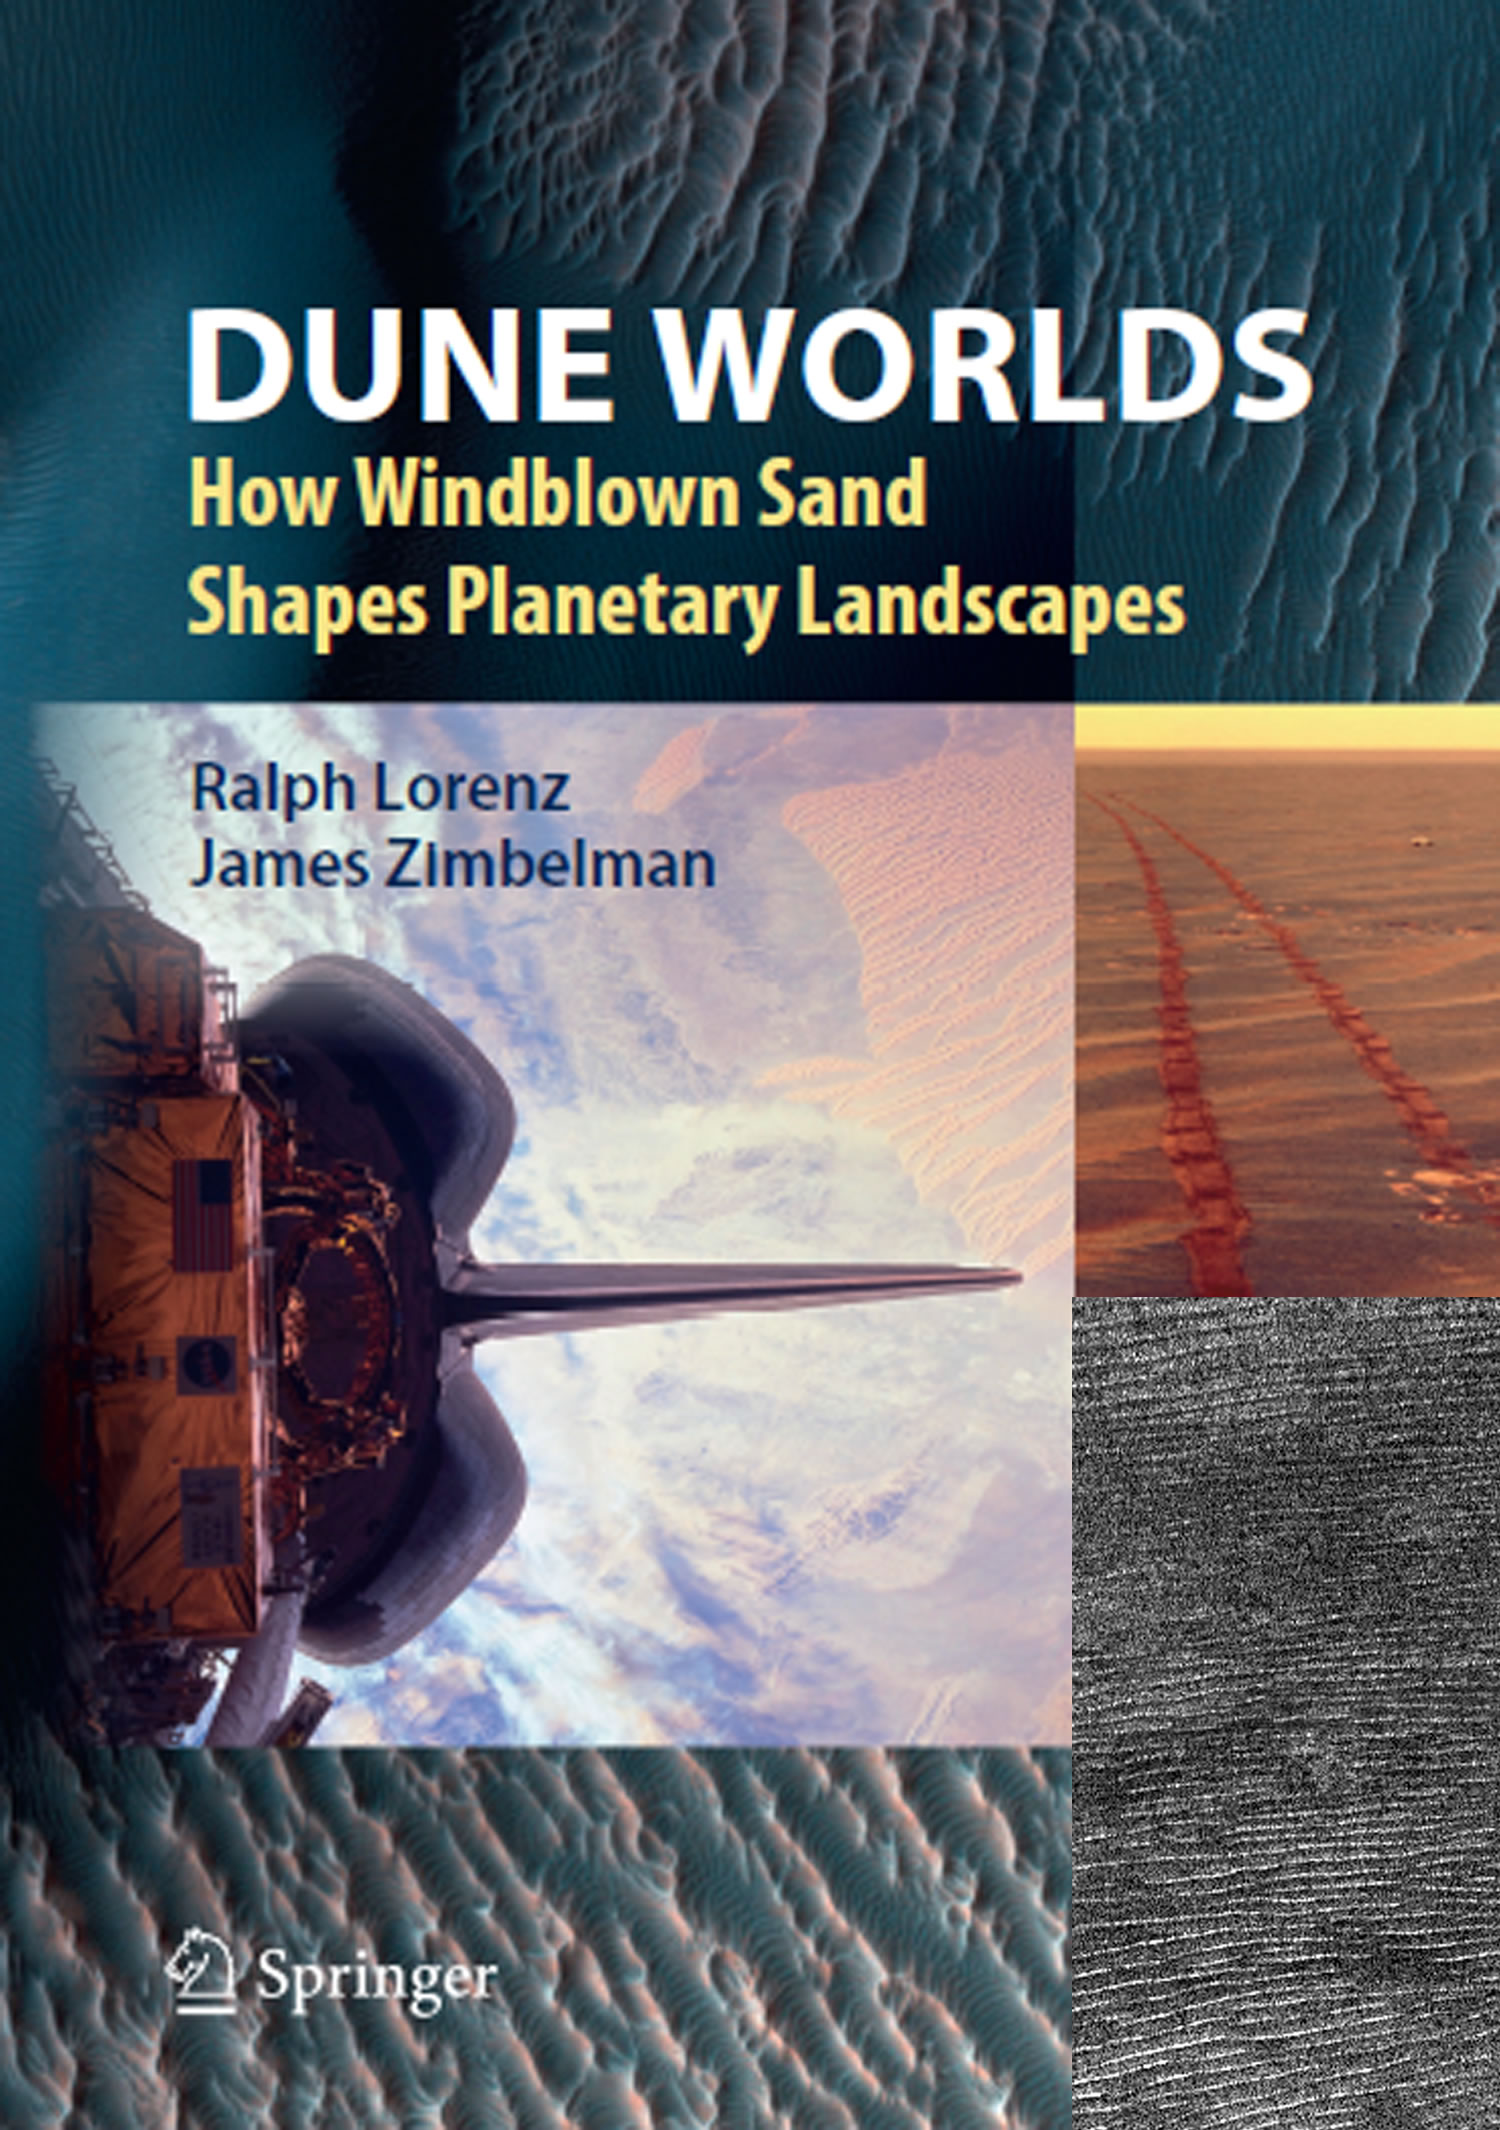 Book cover for a book about sand dunes on terrestial planets featuring various sand dune landscapes on Mars.